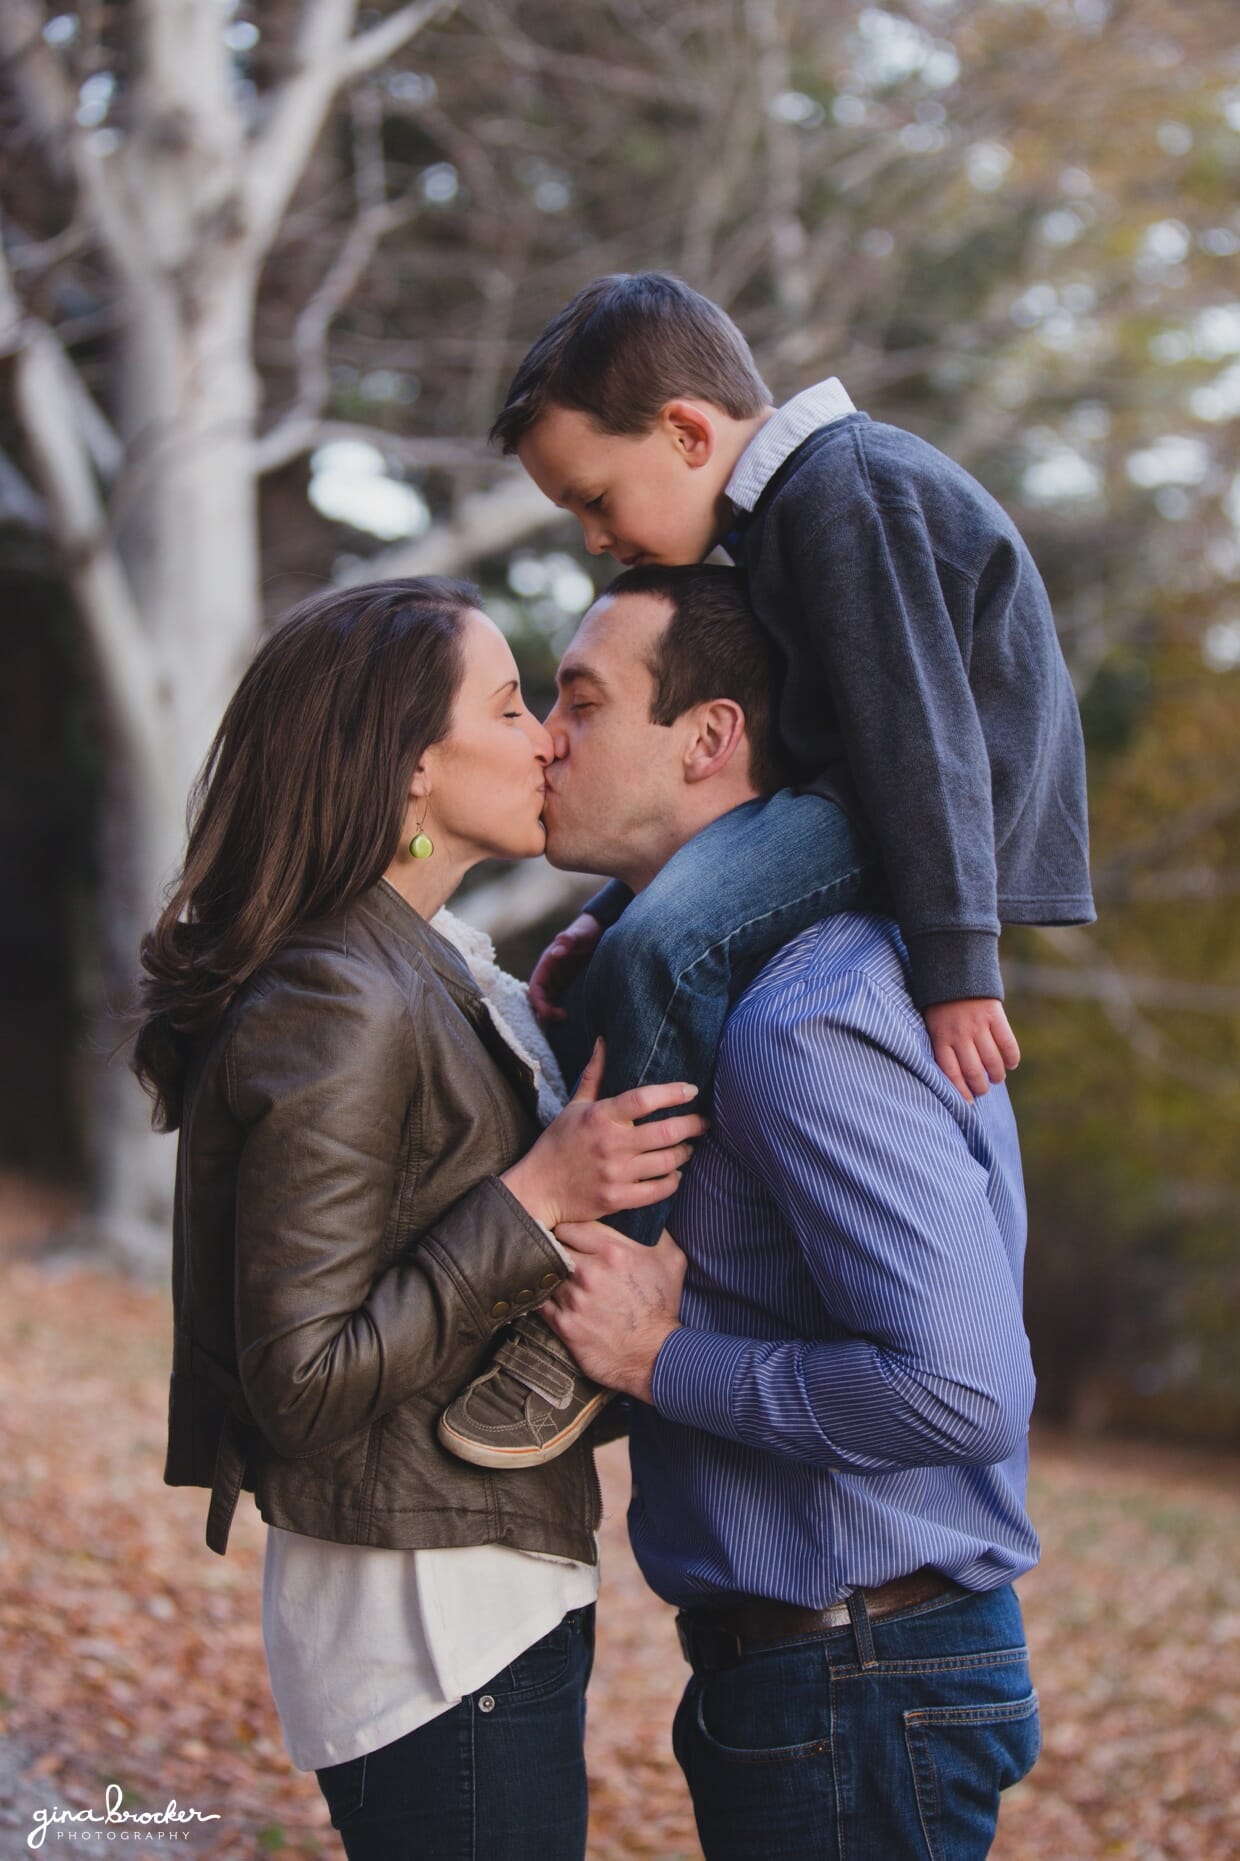 A super cute photograph of a couple kissing during their fall family photo session in Boston's Arnold Arboretum